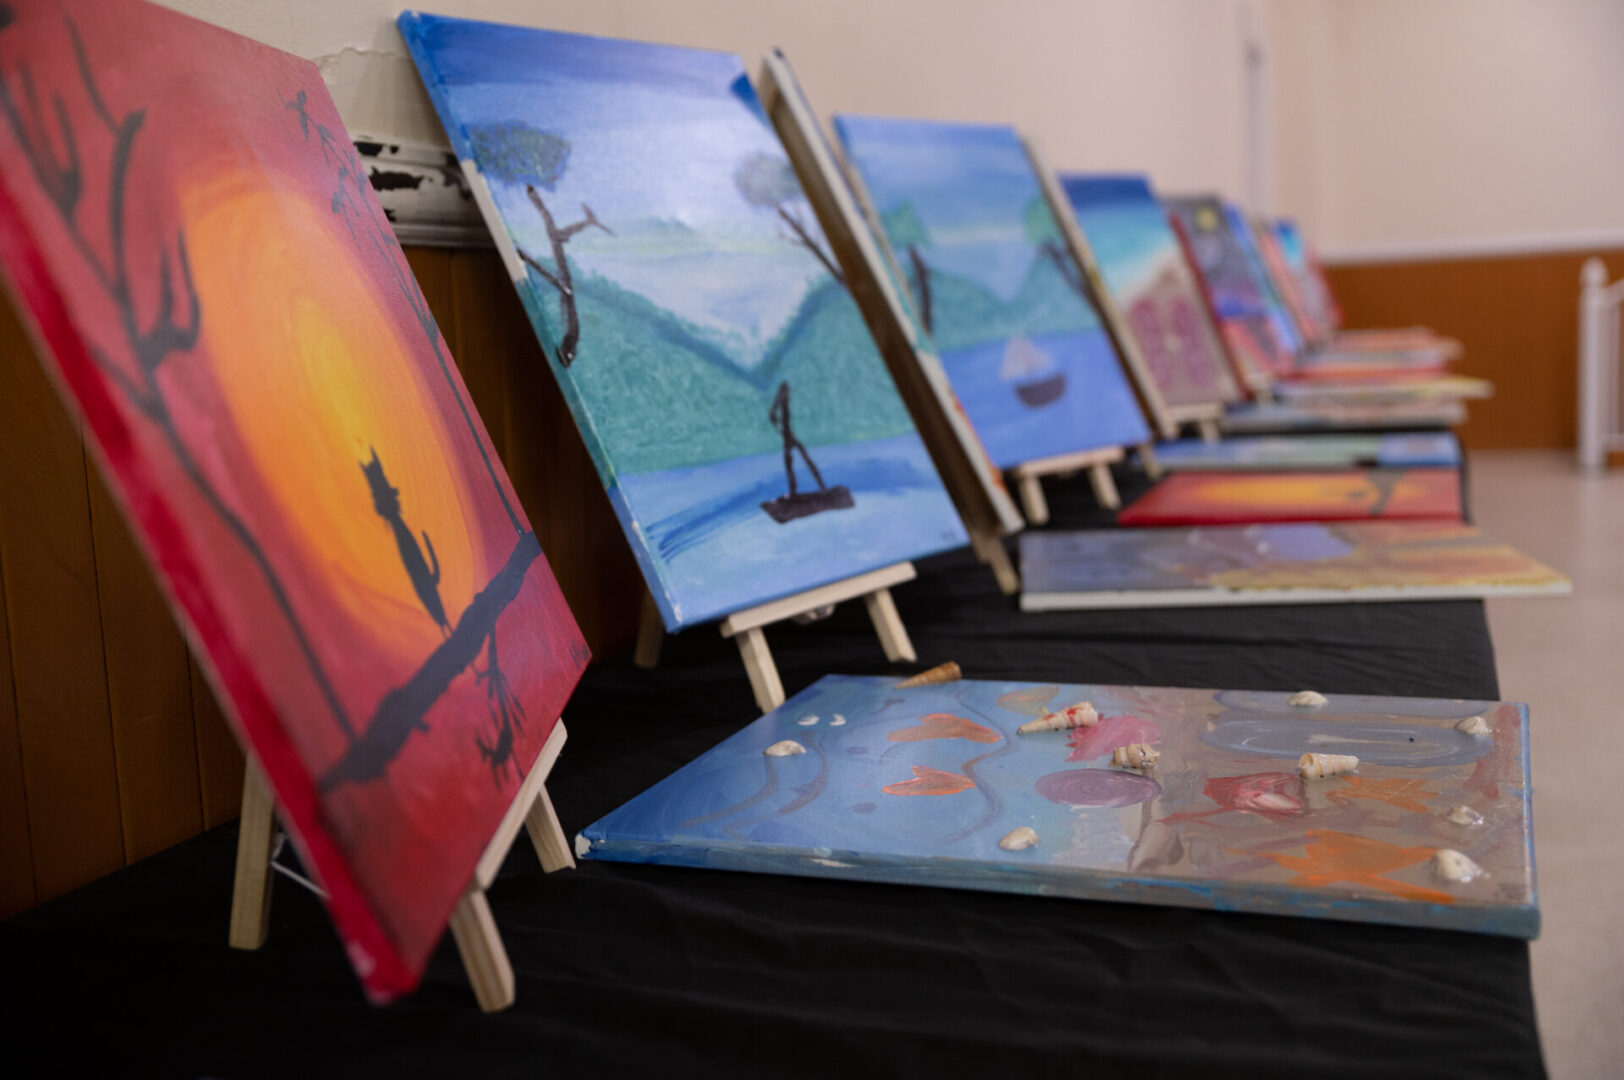 Paintings displayed on the table (view from the side)